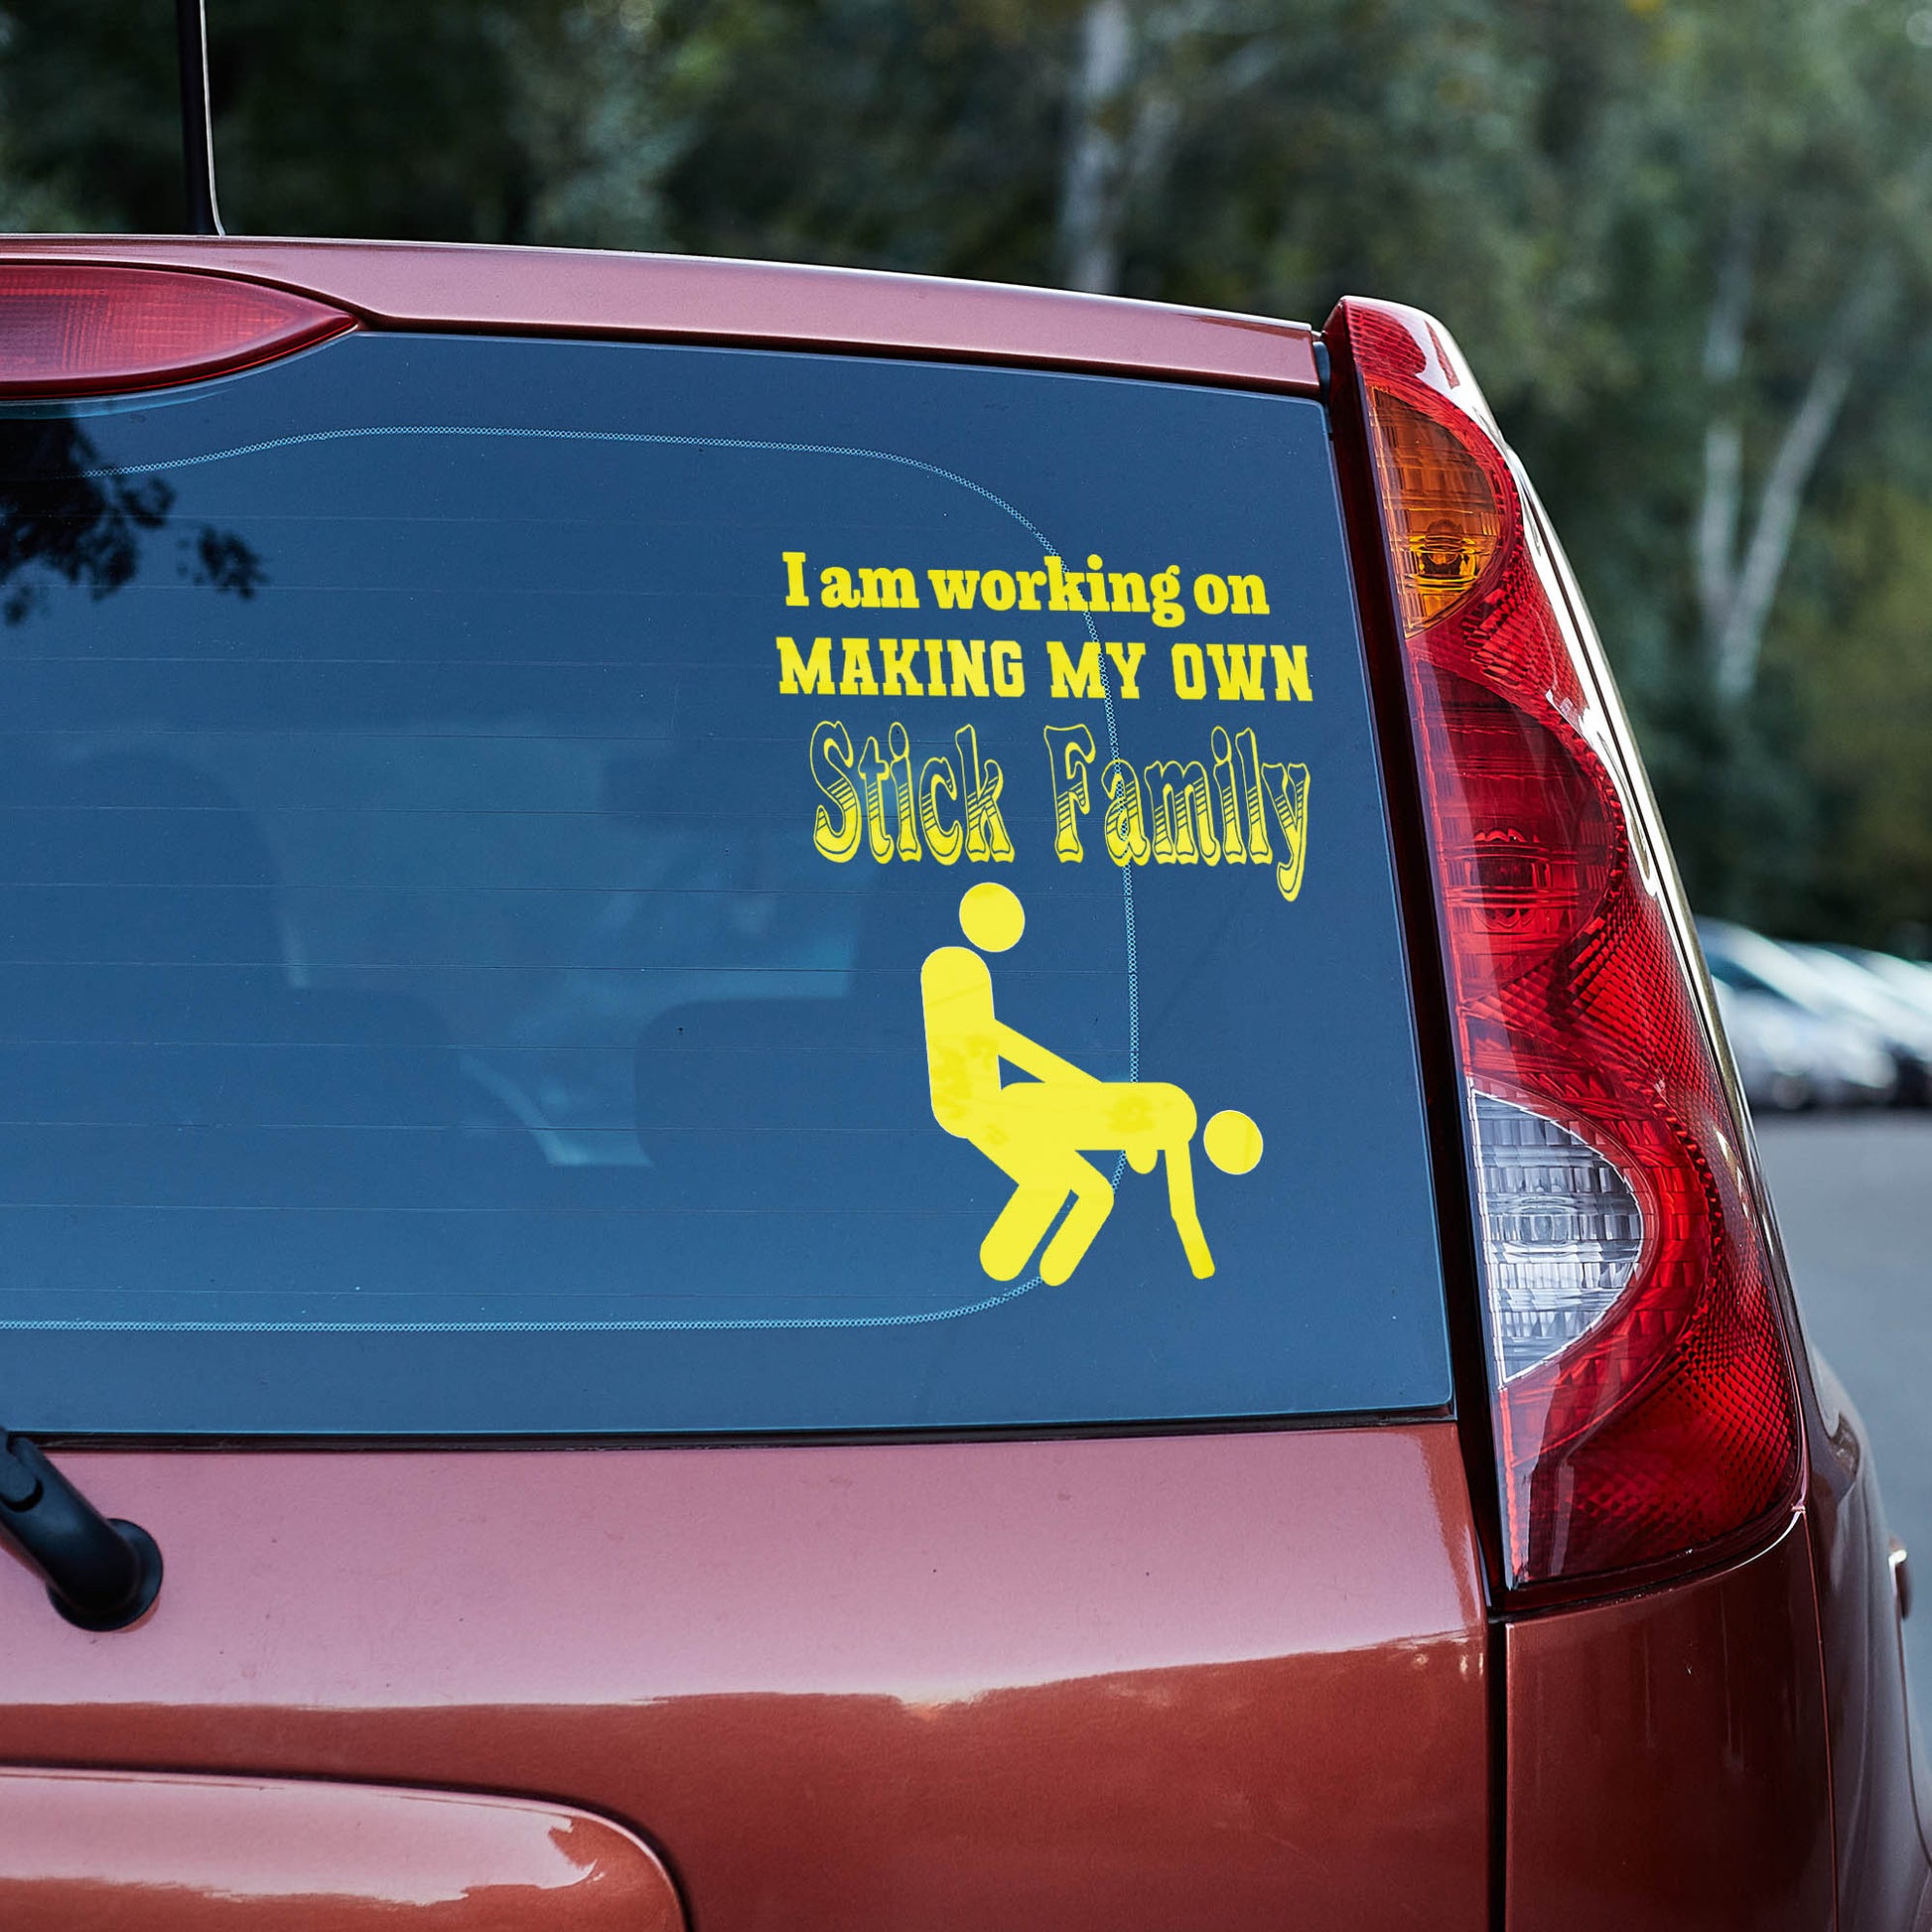 I am working on making my own stick family Vinyl Decal boss gift car decor dads day gift gift for dad gift for grandpa gift for her gift for him gift for husband gift for mom gift for sister gift for wife moms gift Unique gift Vinyl Vinyl decals vinyl sticker Vinyl stickers window decal window sticker